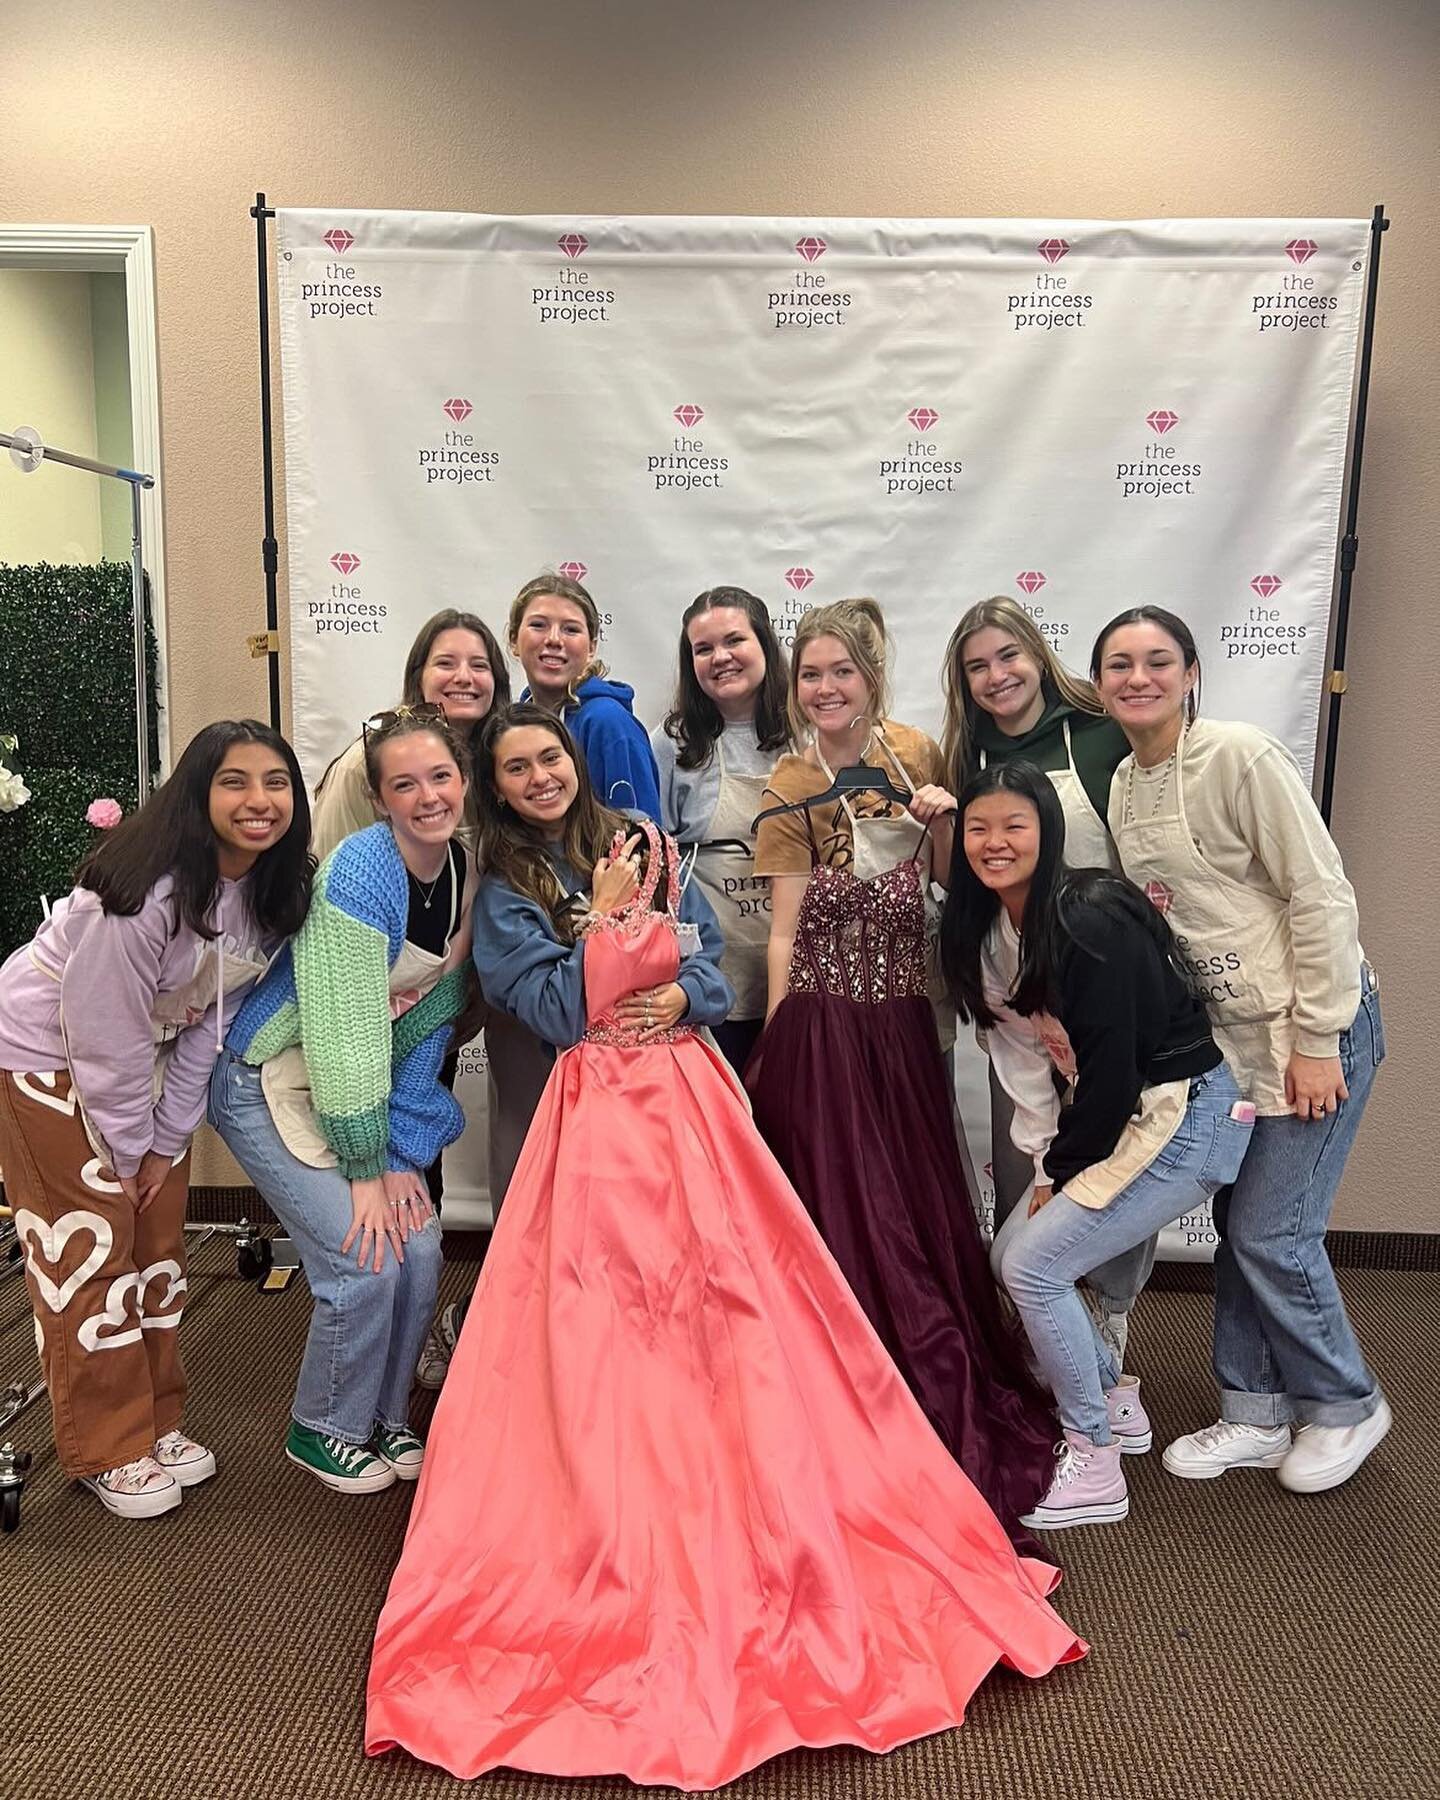 A special thank you to @scubelles for choosing to volunteer with us. It is a busy time  at Princess Project and we appreciate all the support! 💖Interested in volunteering with us? 💖 Visit the link in our bio to sign up!
Our next event ⤵️
💕 March 1